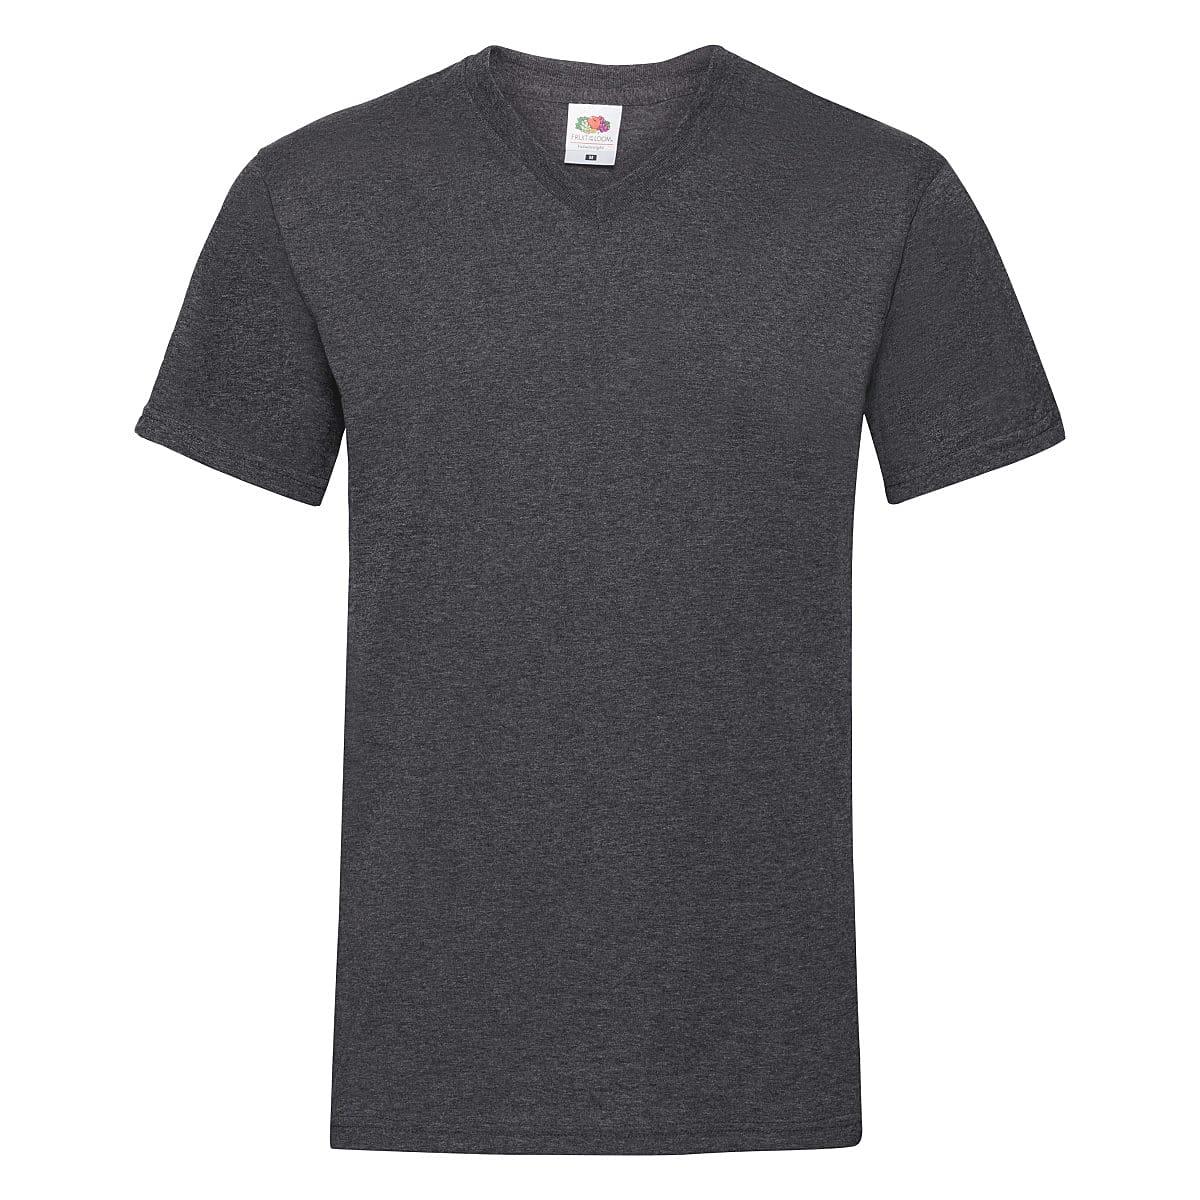 Fruit Of The Loom Valueweight V-Neck T-Shirt in Dark Heather (Product Code: 61066)